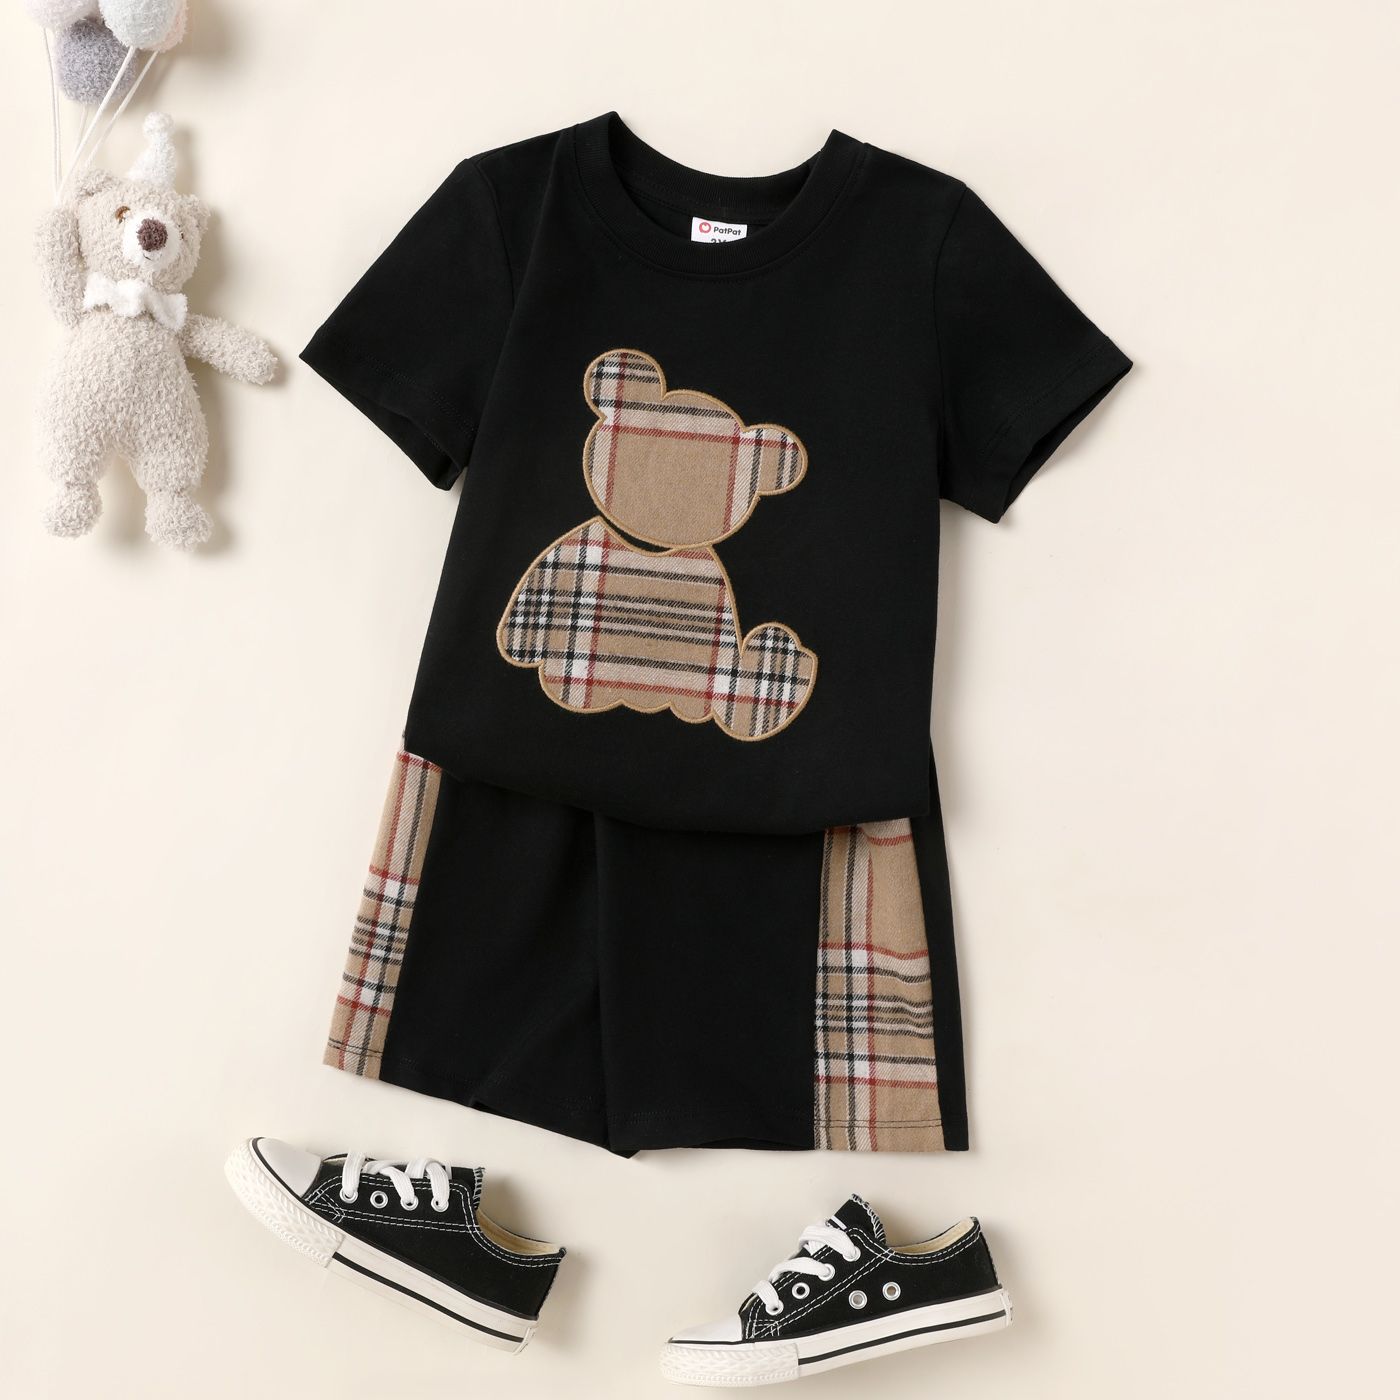 2pcs Toddler Boy Bear Embroidered Cotton Short-sleeve Tee and Plaid Splice Shorts Set